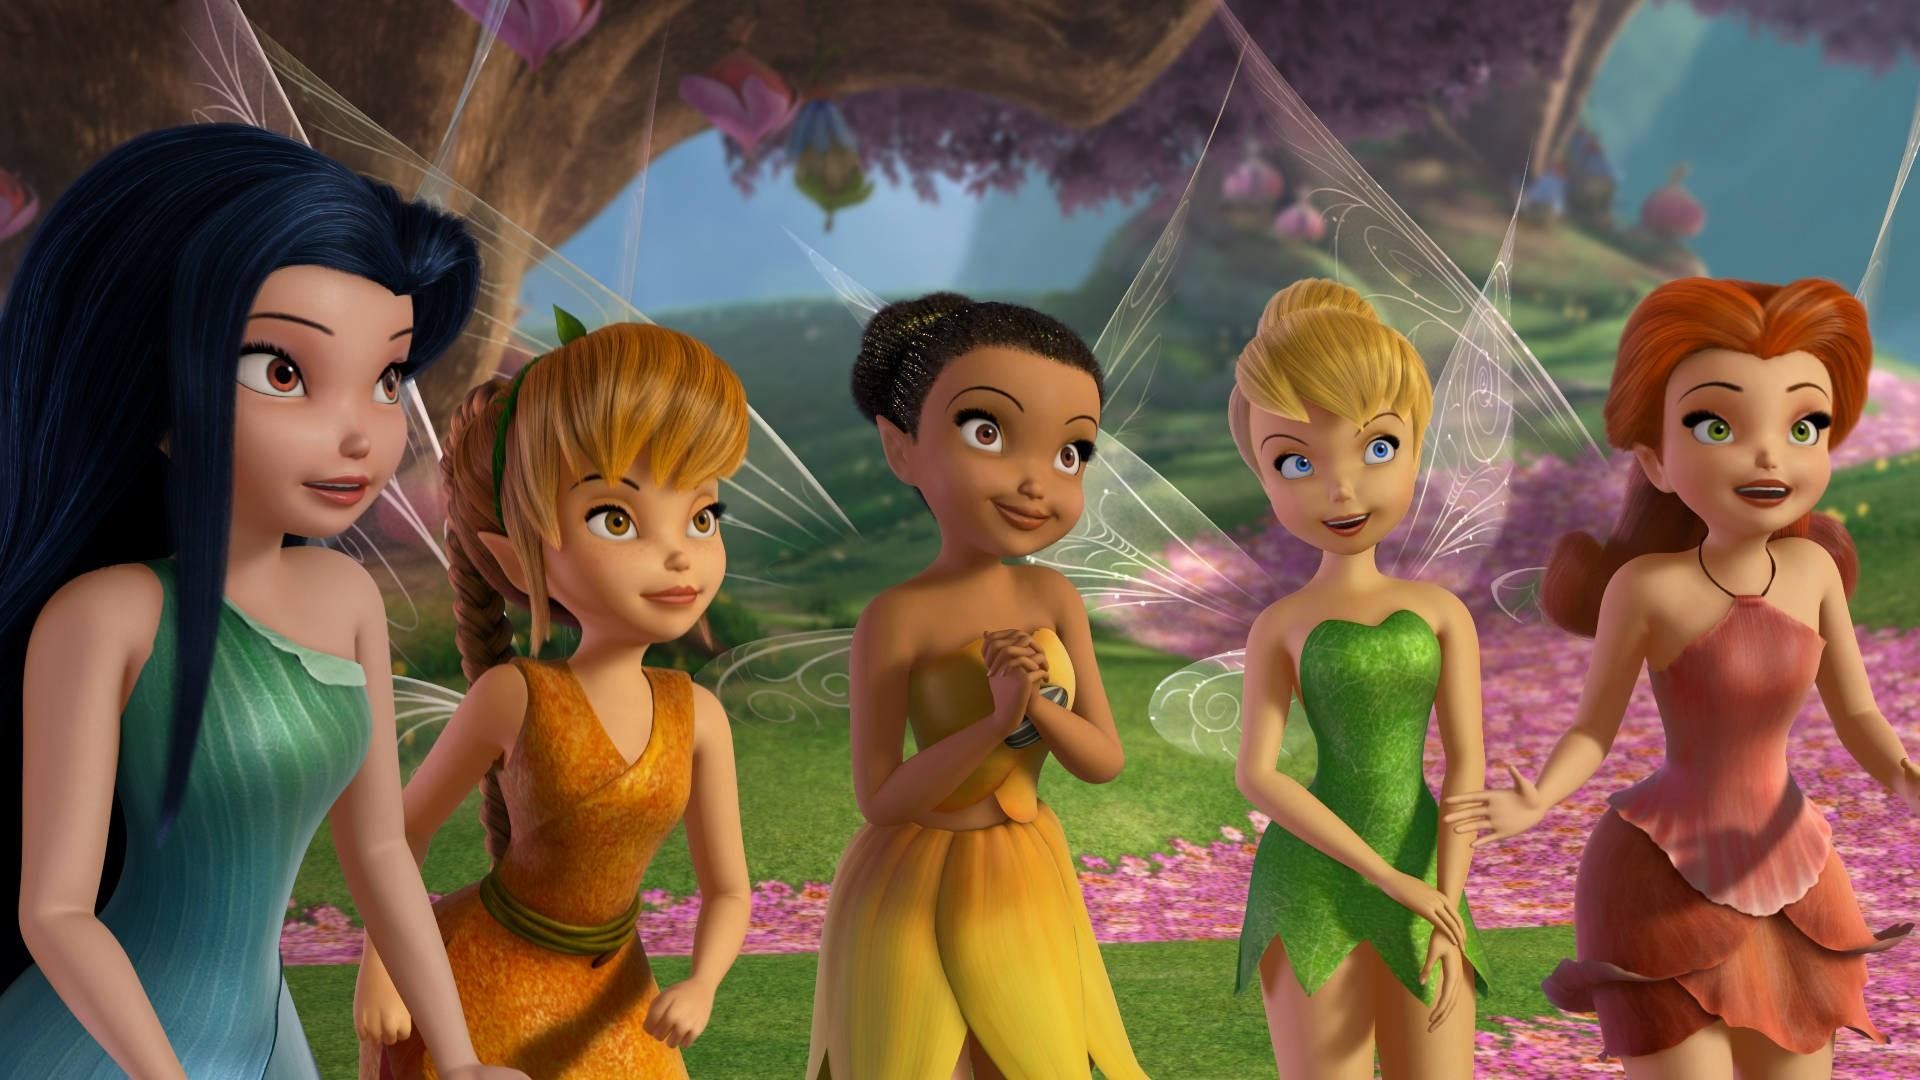 1920x1080 wallpaper.wiki-Computer-movie-tinkerbell-film-photos-PIC-